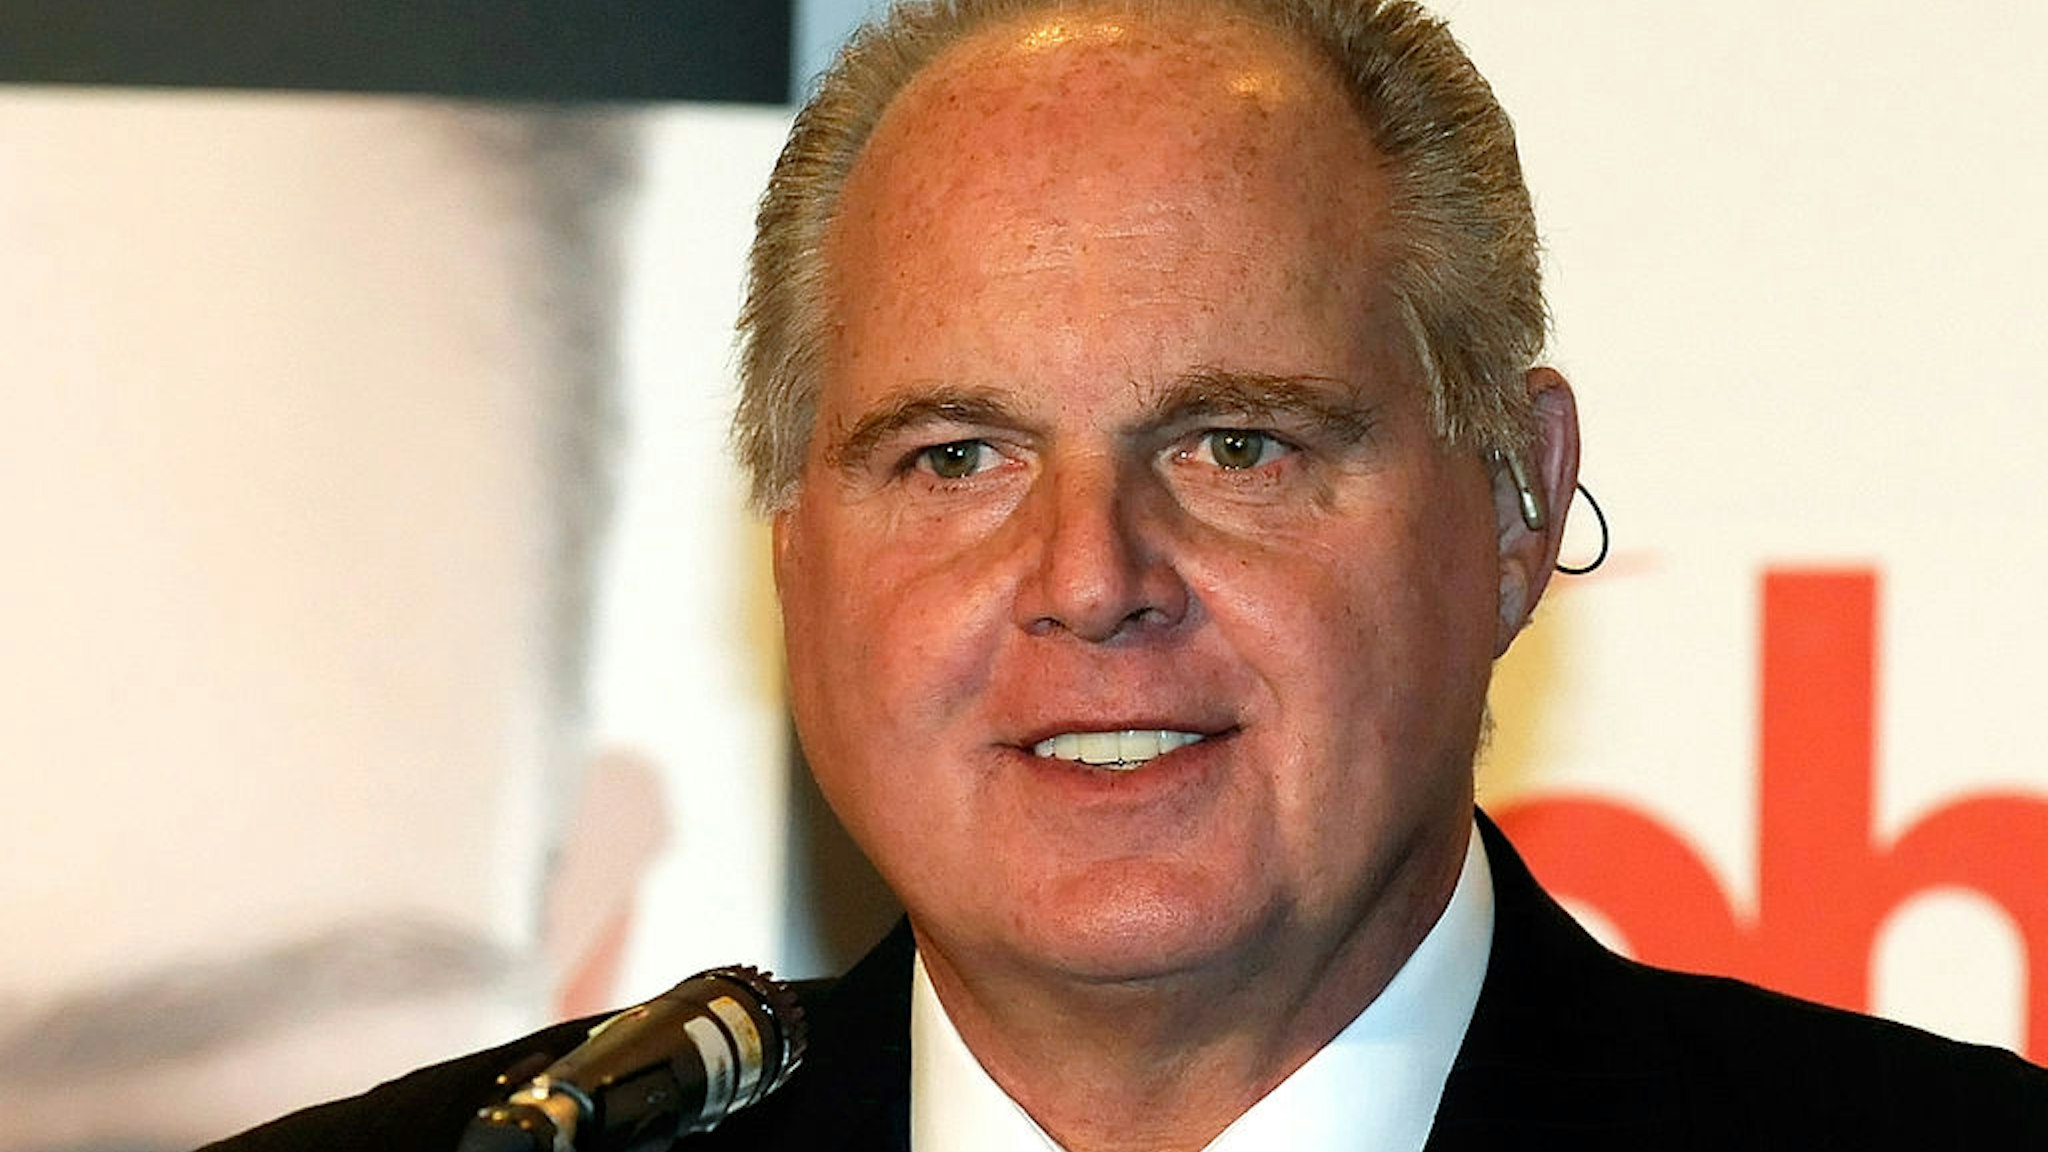 Radio talk show host and conservative commentator Rush Limbaugh, one of the judges for the 2010 Miss America Pageant, speaks during a news conference for judges at the Planet Hollywood Resort &amp; Casino January 27, 2010 in Las Vegas, Nevada. The pageant will be held at the resort on January 30, 2010.